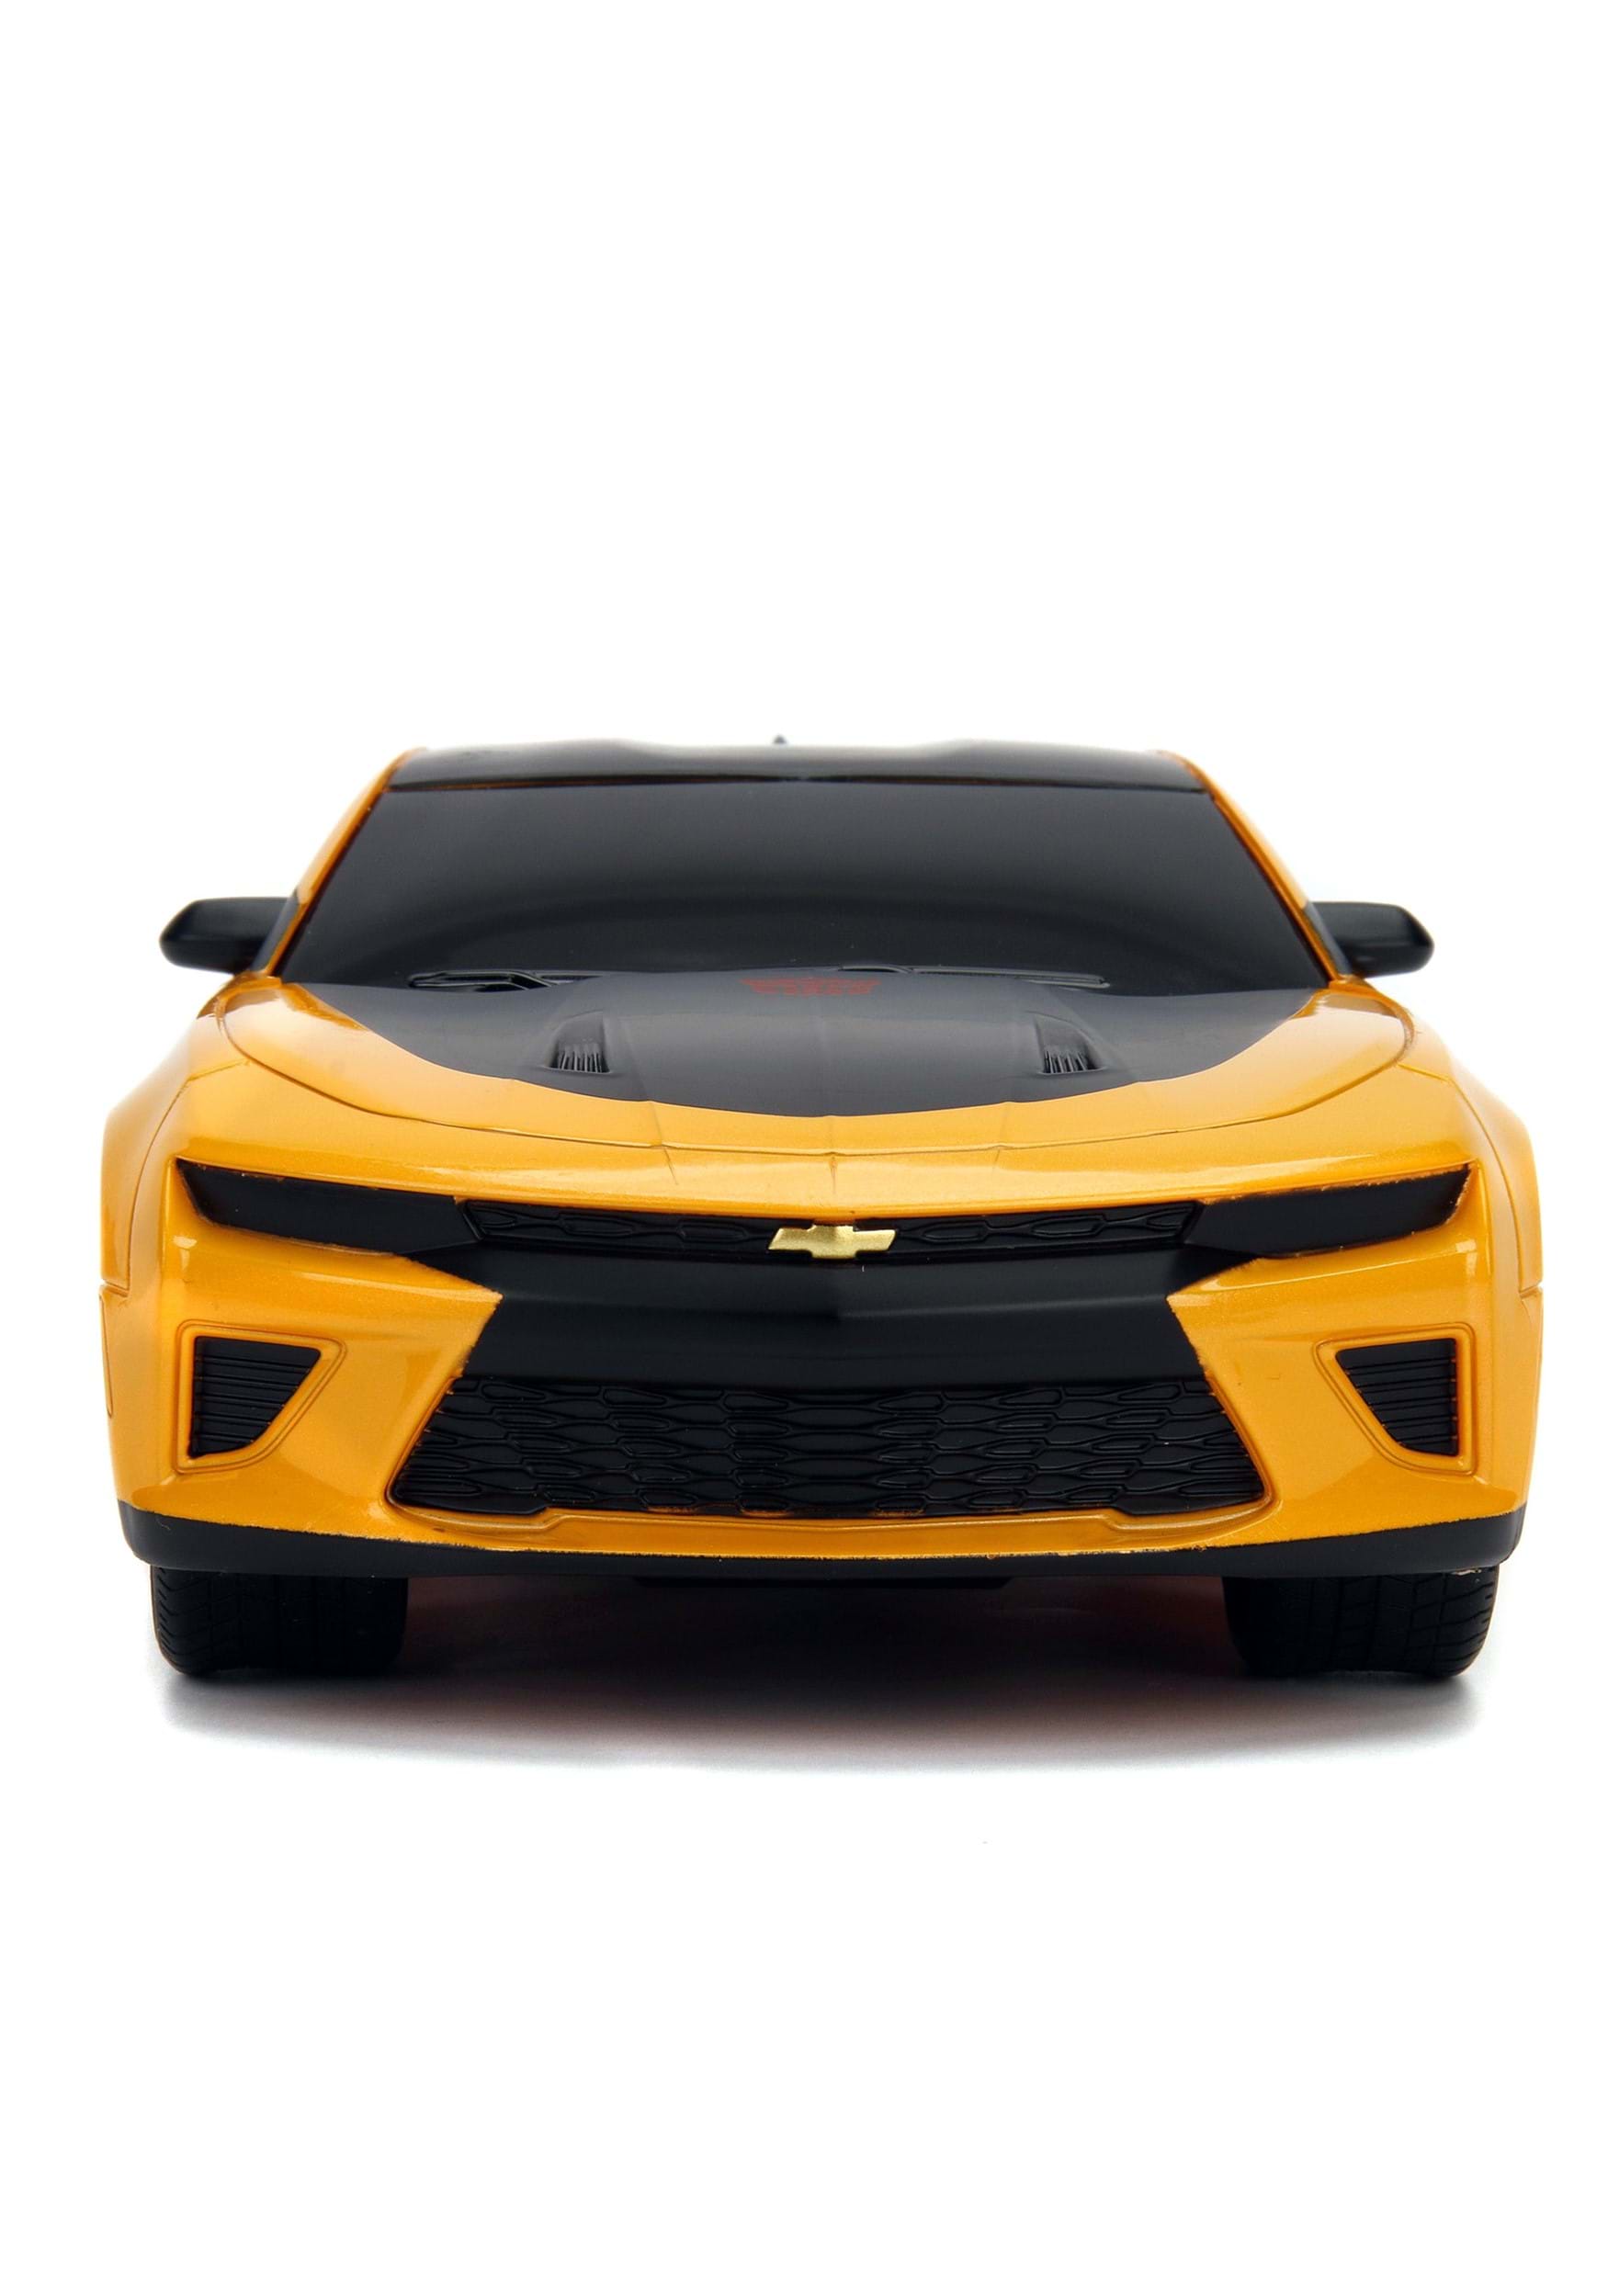 1:16 Scale 2016 Chevy Camaro Hollywood Rides Transformers RC Bumblebee